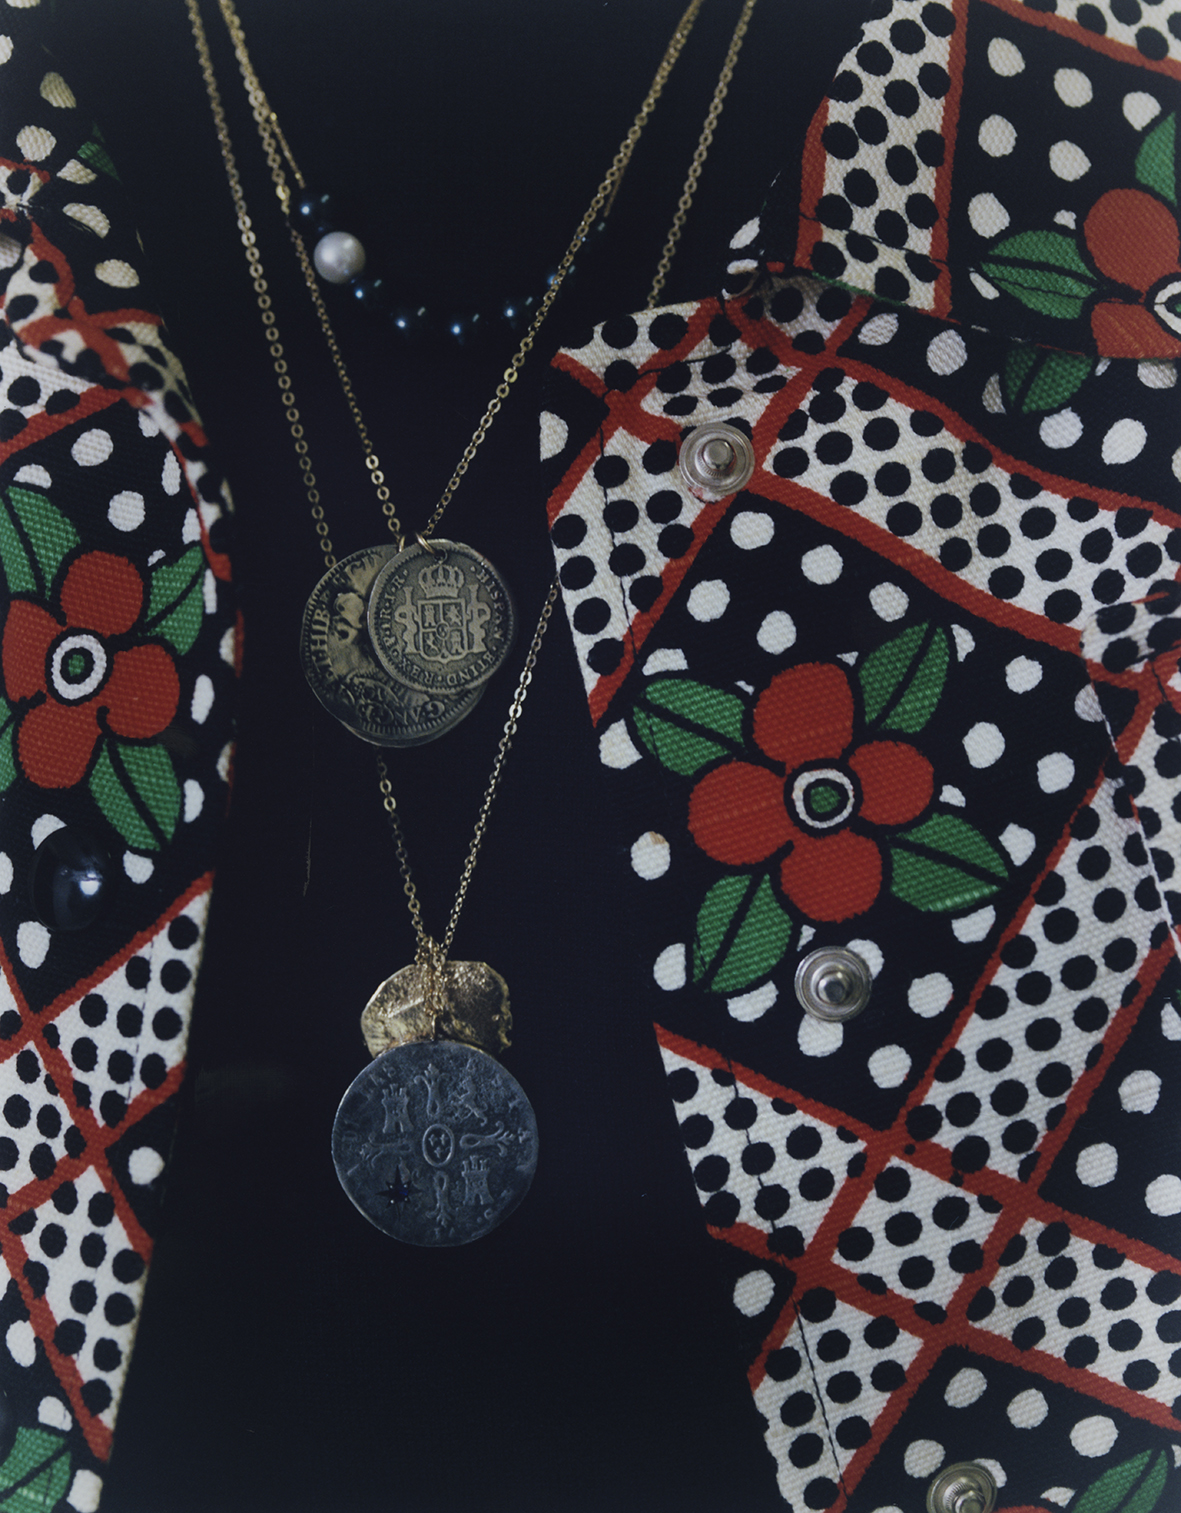  Coin necklace with midnight blue sapphire, and two coin set necklace both LAURA LEE JEWELLERY, black and white pearls necklace SWEETPEA JEWELLERY, floral printed jacket FRANCO JACASSI VINTAGE DELIRIUM, black stitched turtleneck PRADA. 